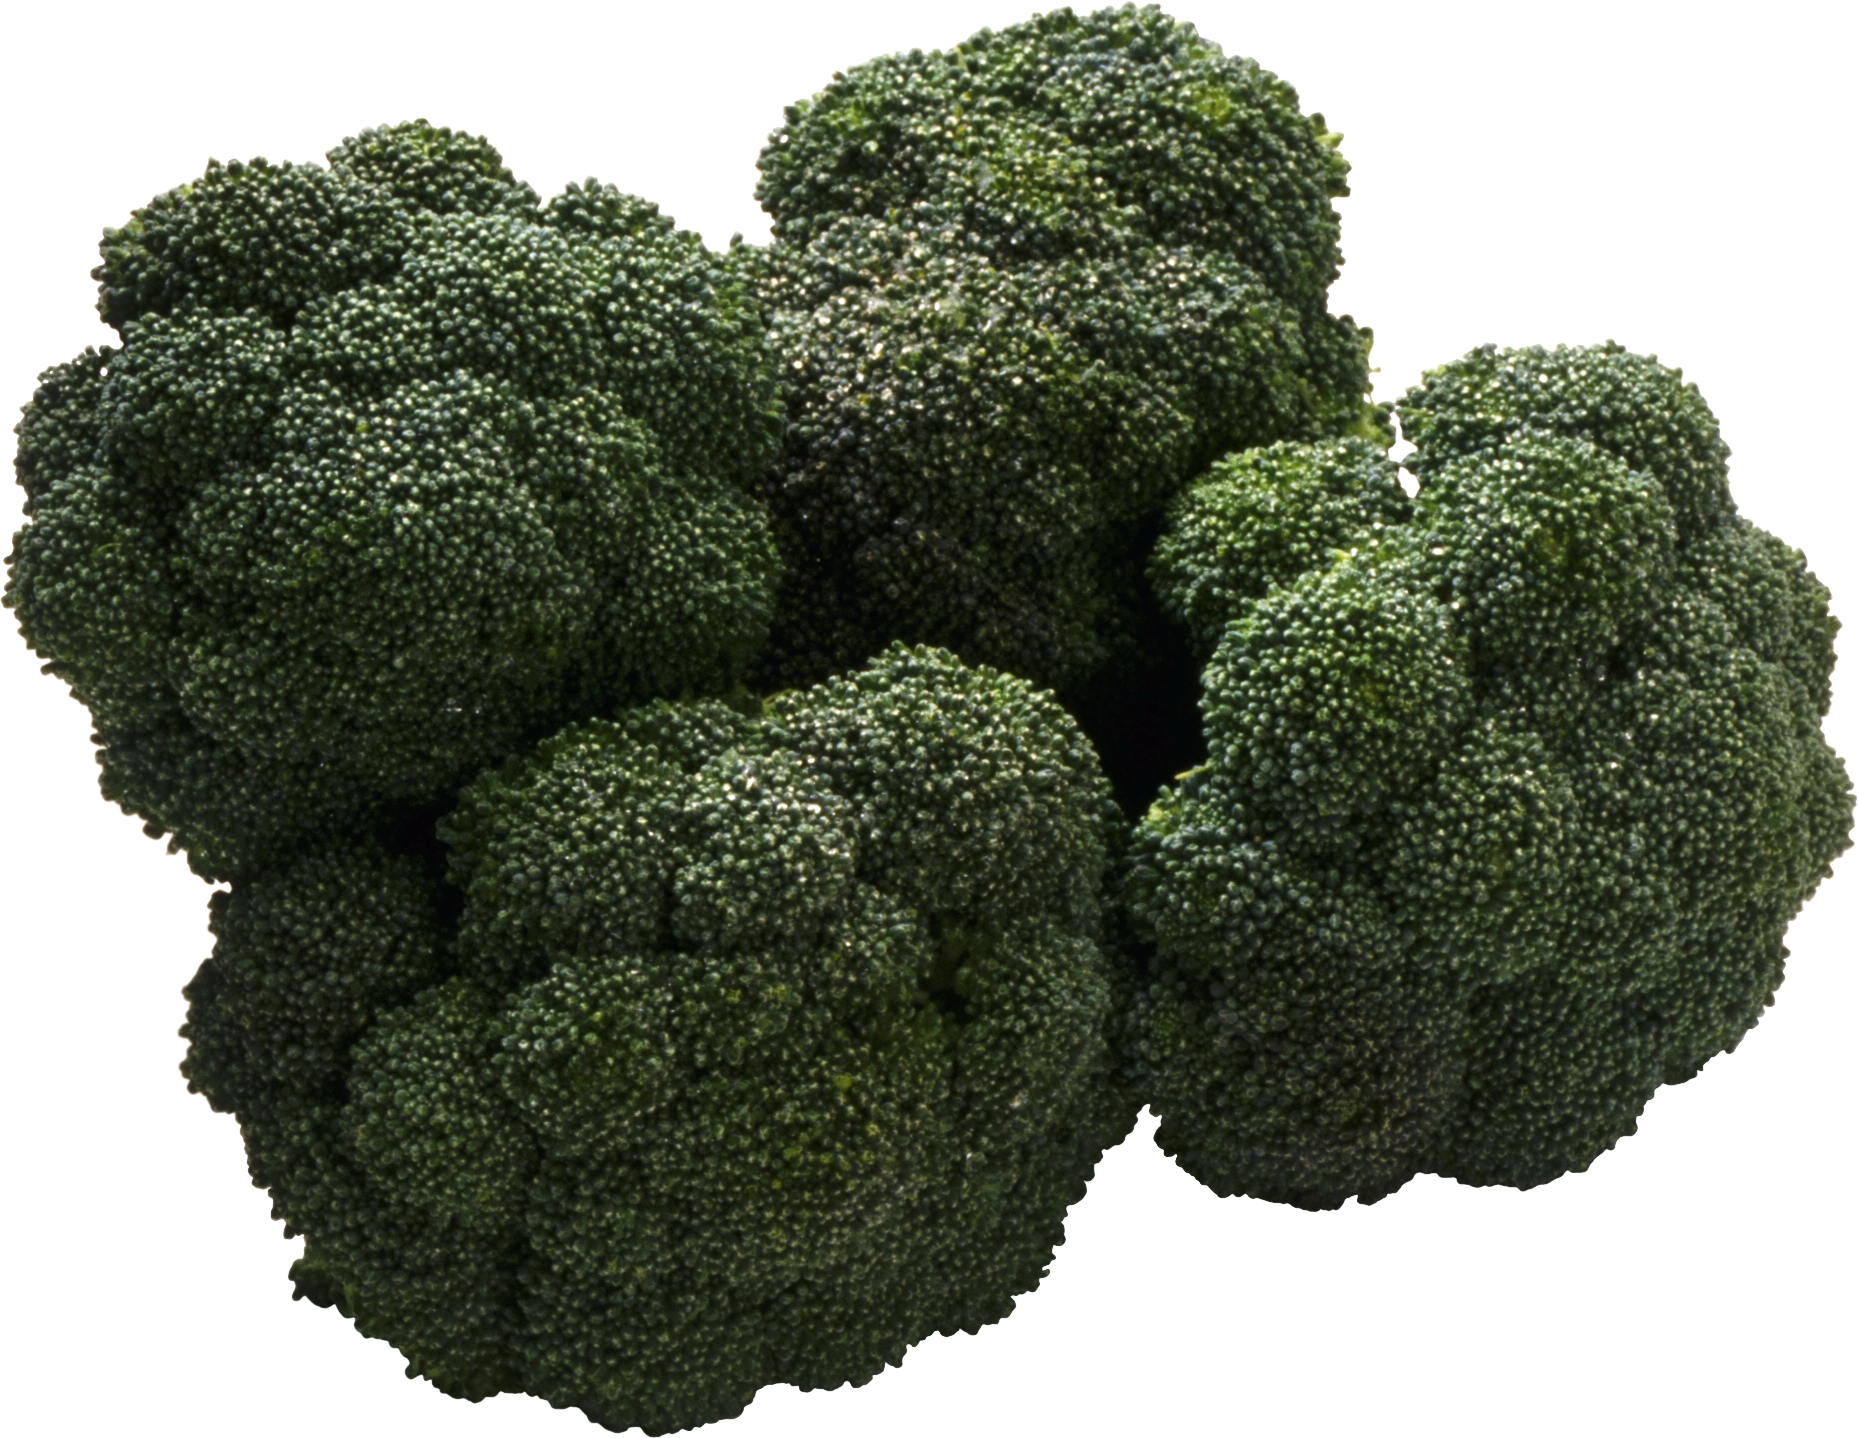 Broccoli Png Image - Broccoli, Transparent background PNG HD thumbnail